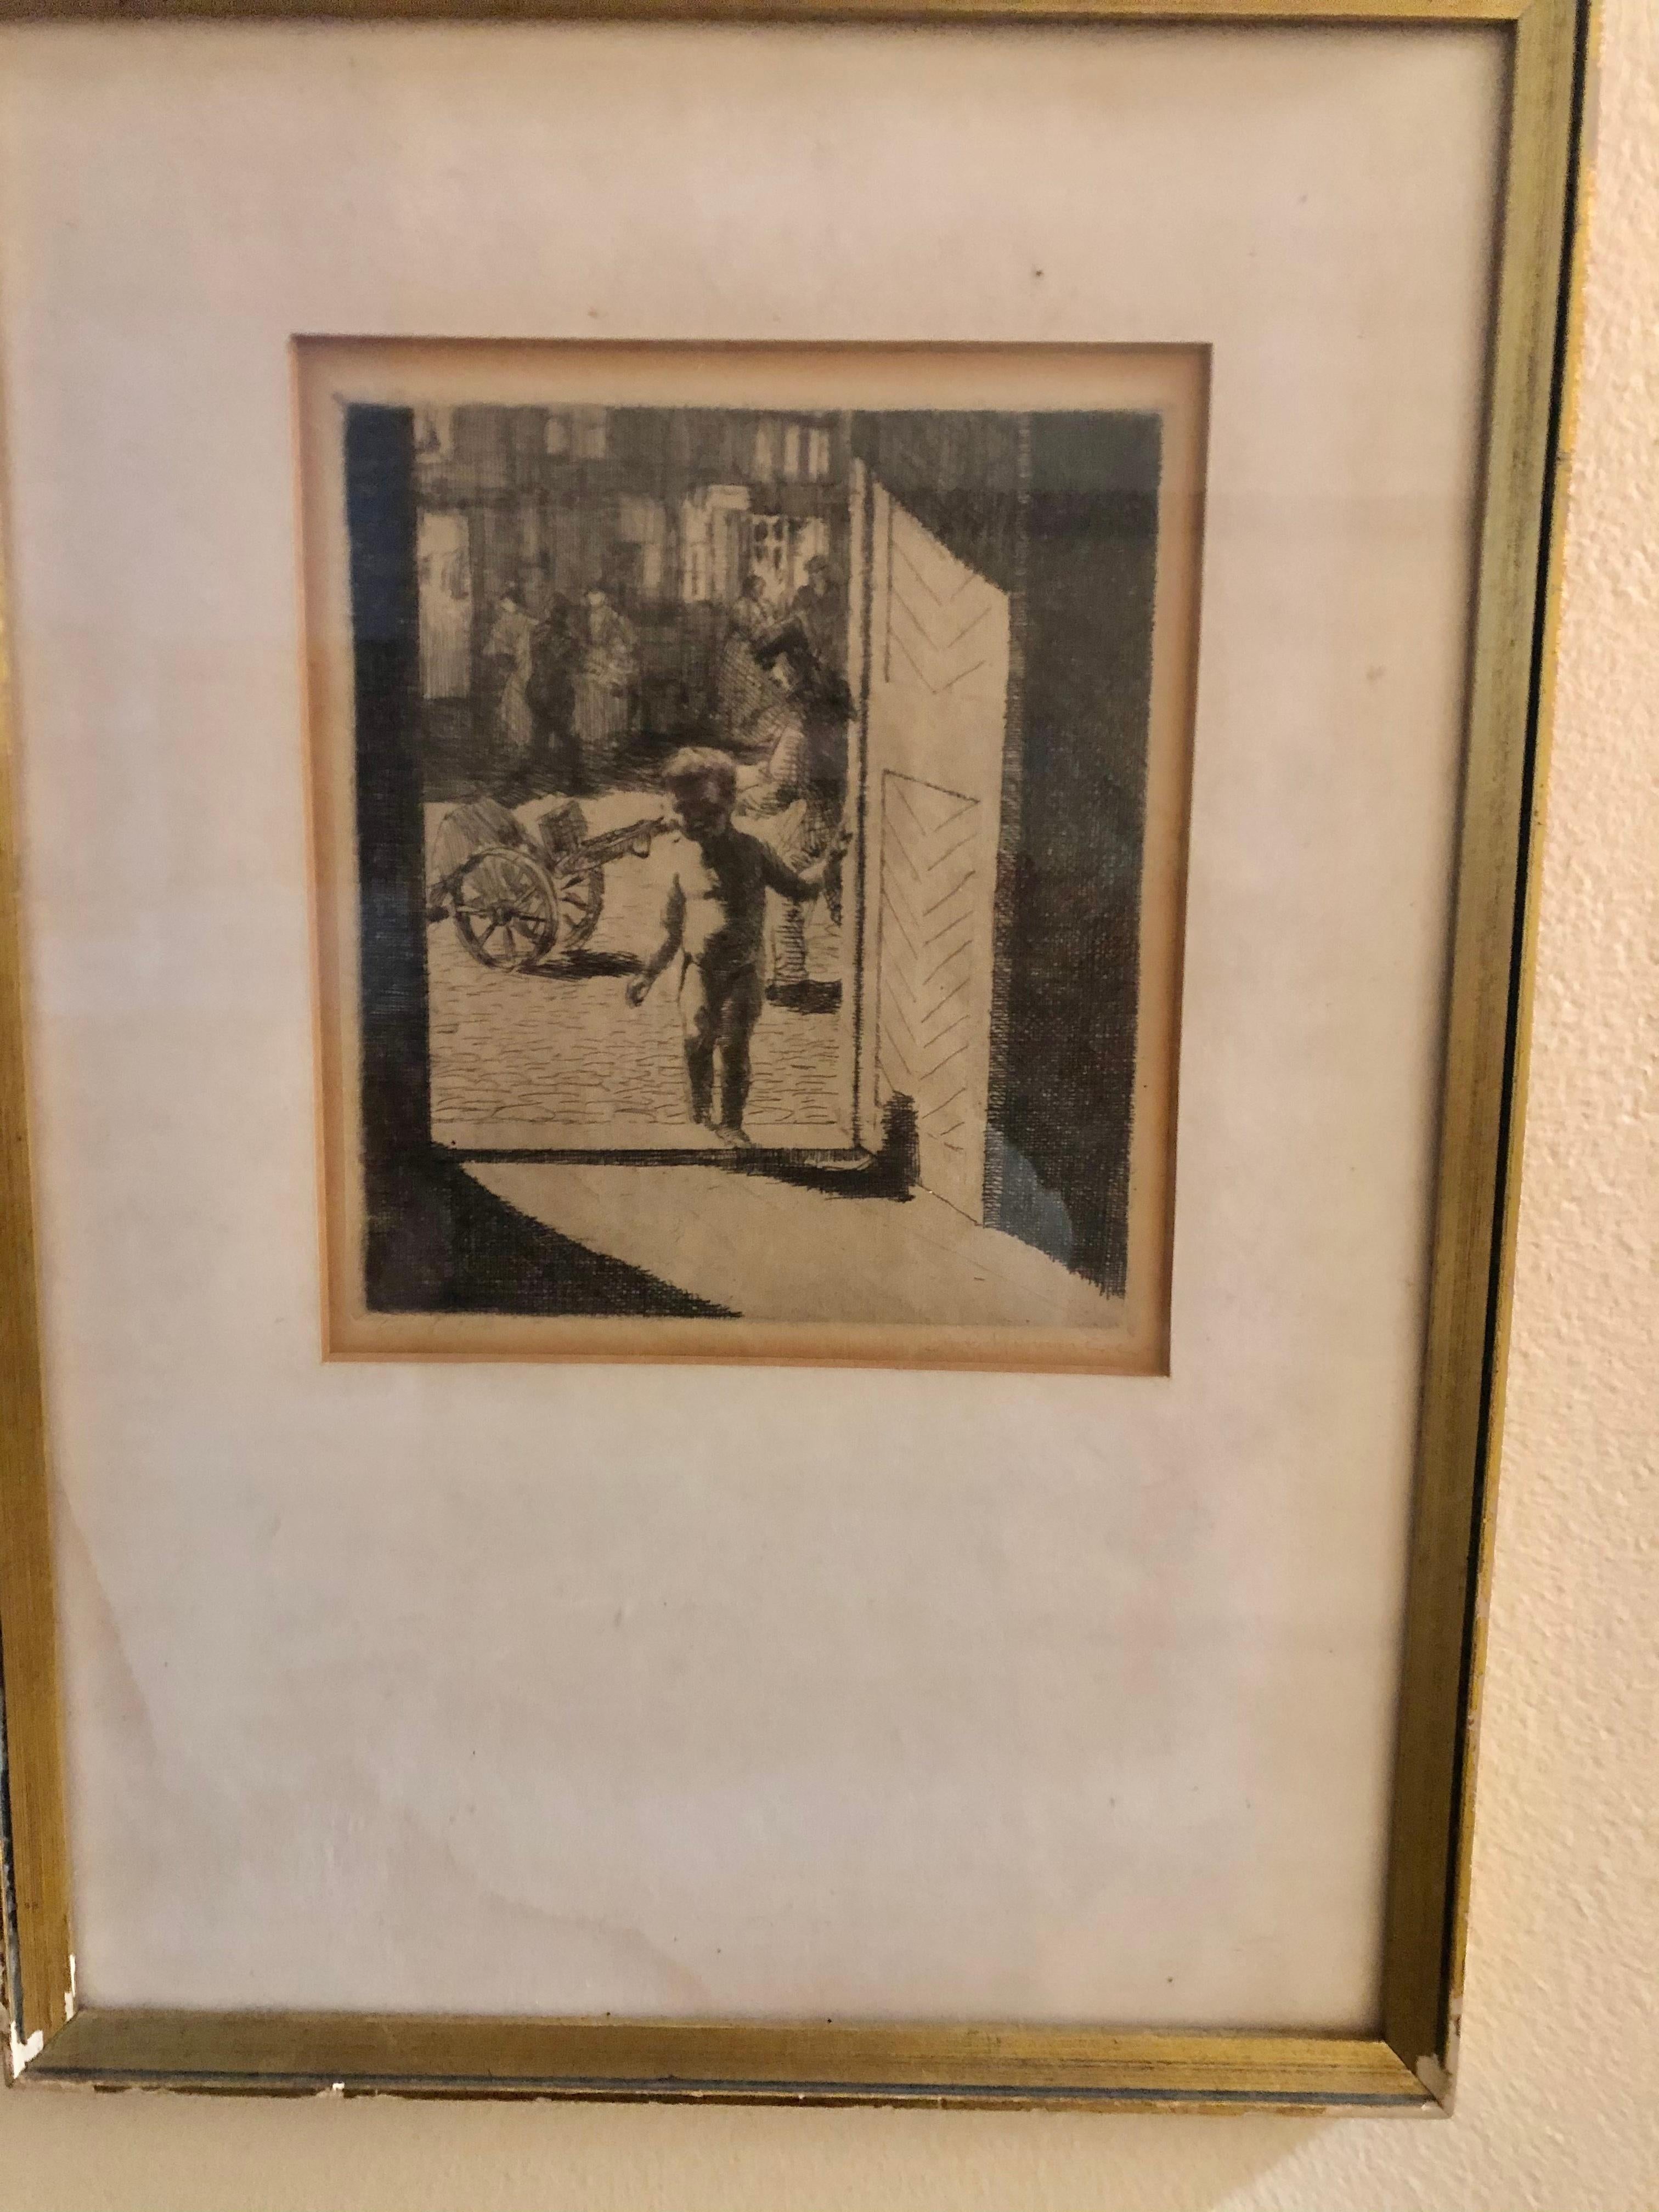 Masterfully executed  etching which is signed but is illegible. The contrast of shadows and sunlight in doorway is particularly well done. Background figures could be Dutch. Etching measures 7 1/2 inches high by 6 1/2 wide. The frame measures 16 1/8